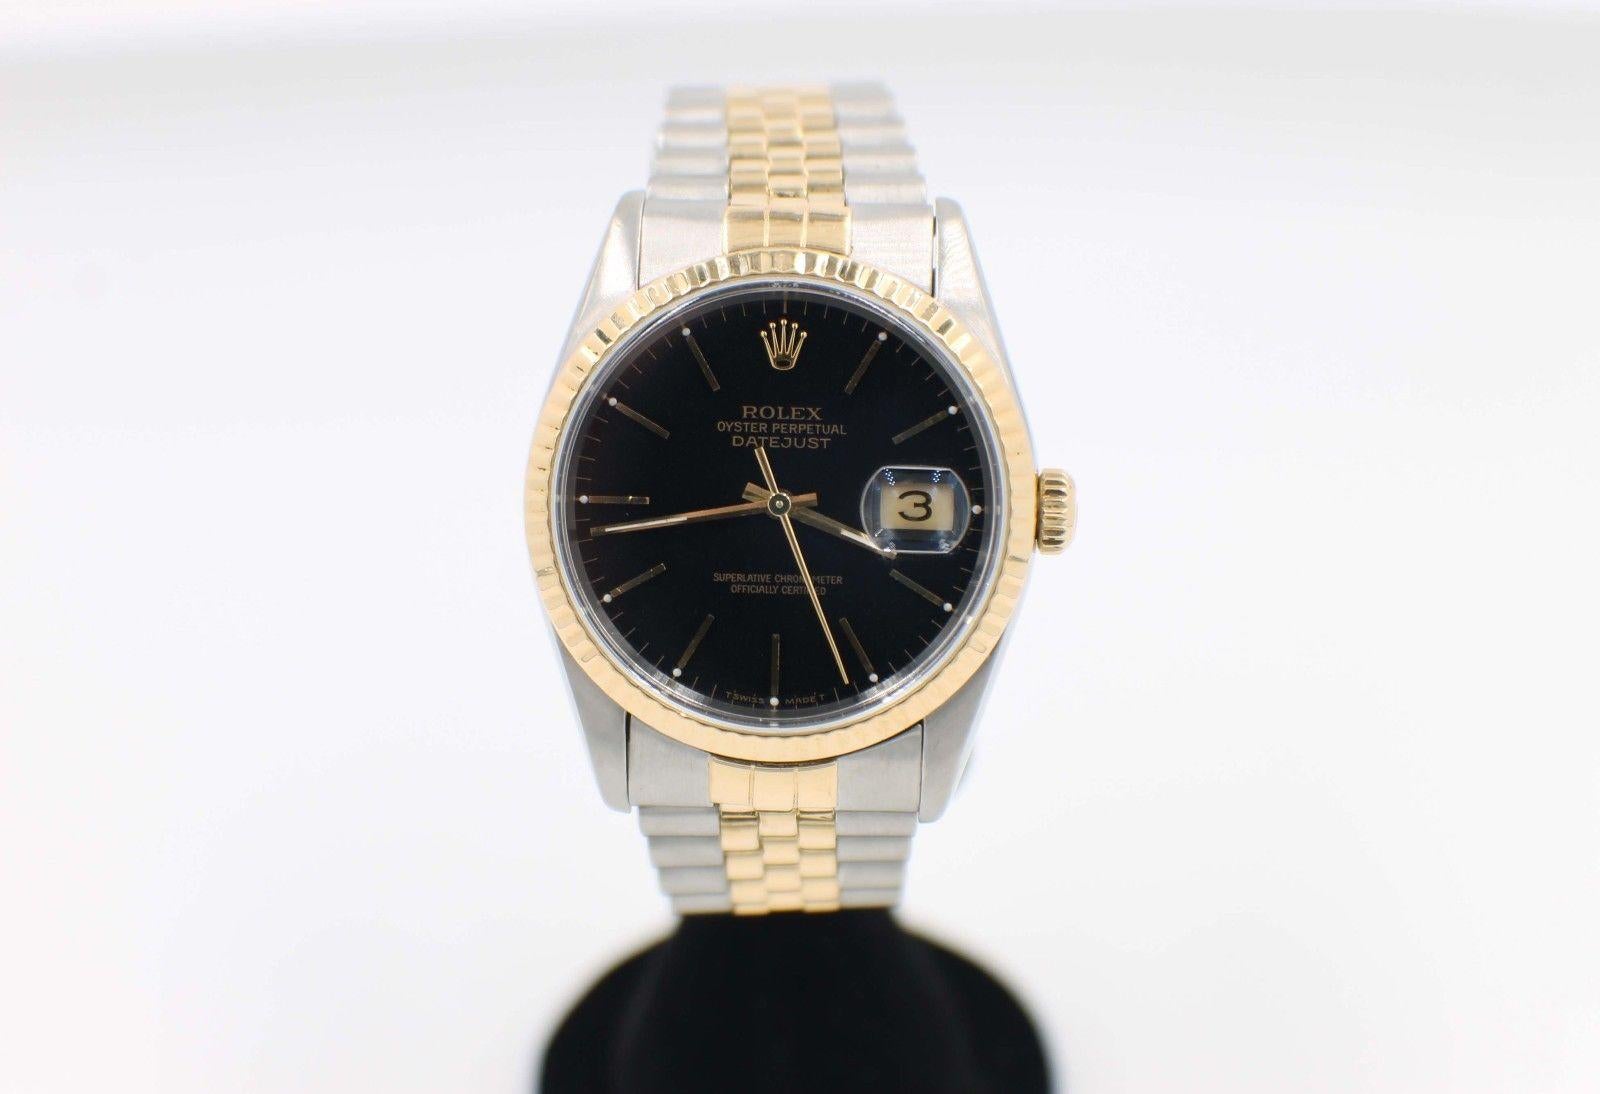 Style Number: 16233 
Serial: S523*** 
Model: Datejust 
Case Material: Stainless Steel 
Band: 18K Yellow Gold & Stainless Steel 
Bezel: 18K Yellow Gold 
Dial: Black 
Face: Sapphire Crystal  
Case Size: 36mm 
Includes: 
-Rolex Box & Papers
-Certified